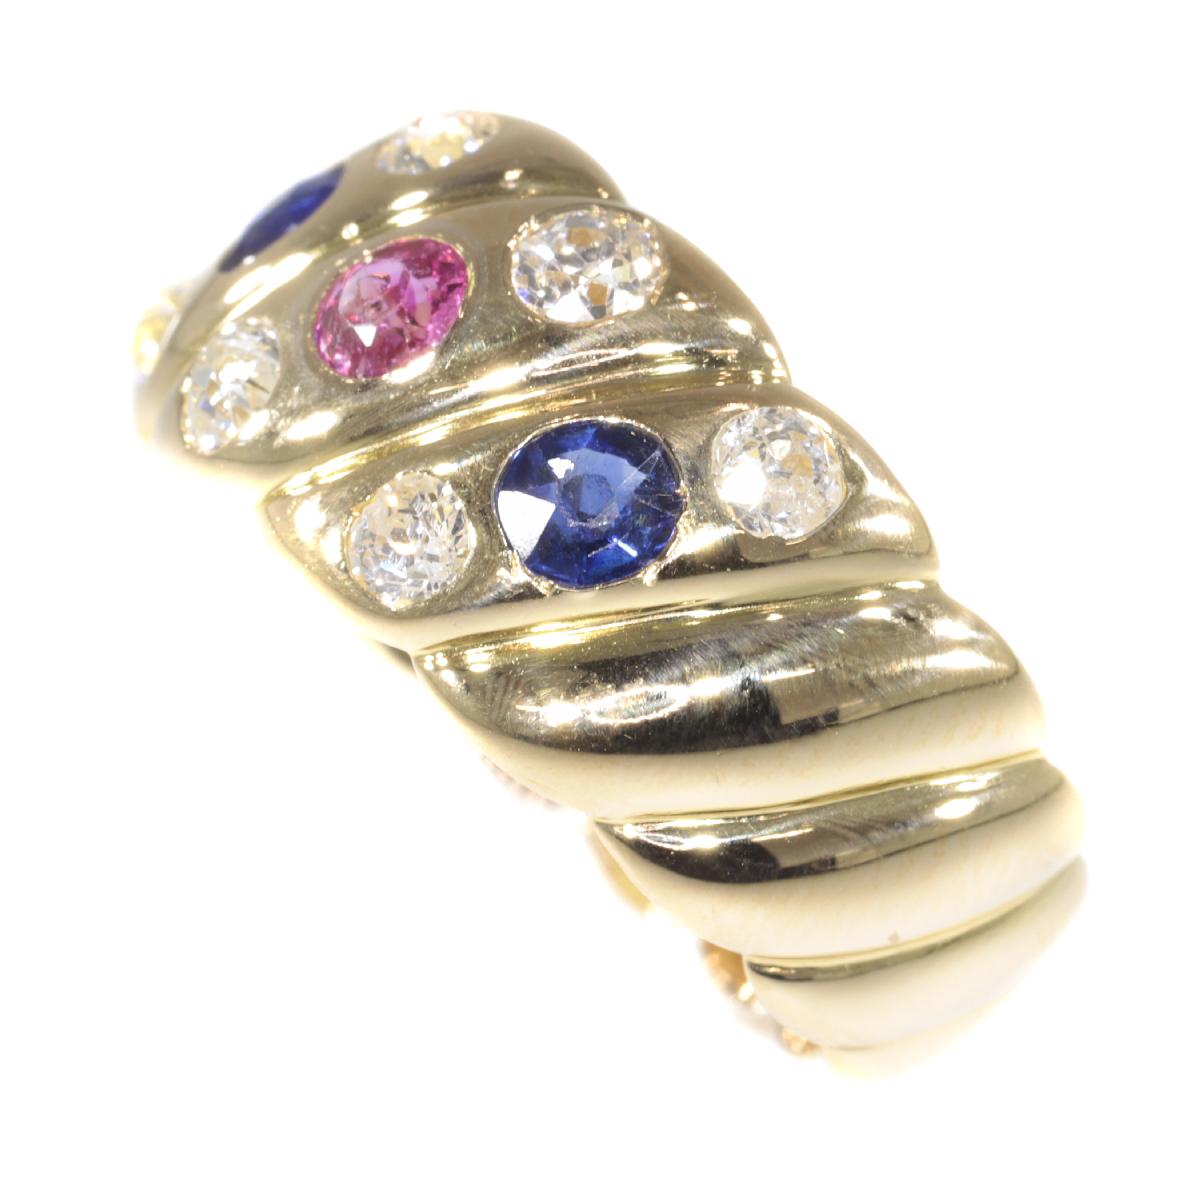 Antique 18 Karat Gold Victorian Diamond Sapphire and Ruby Engagement Ring, 1880s For Sale 2